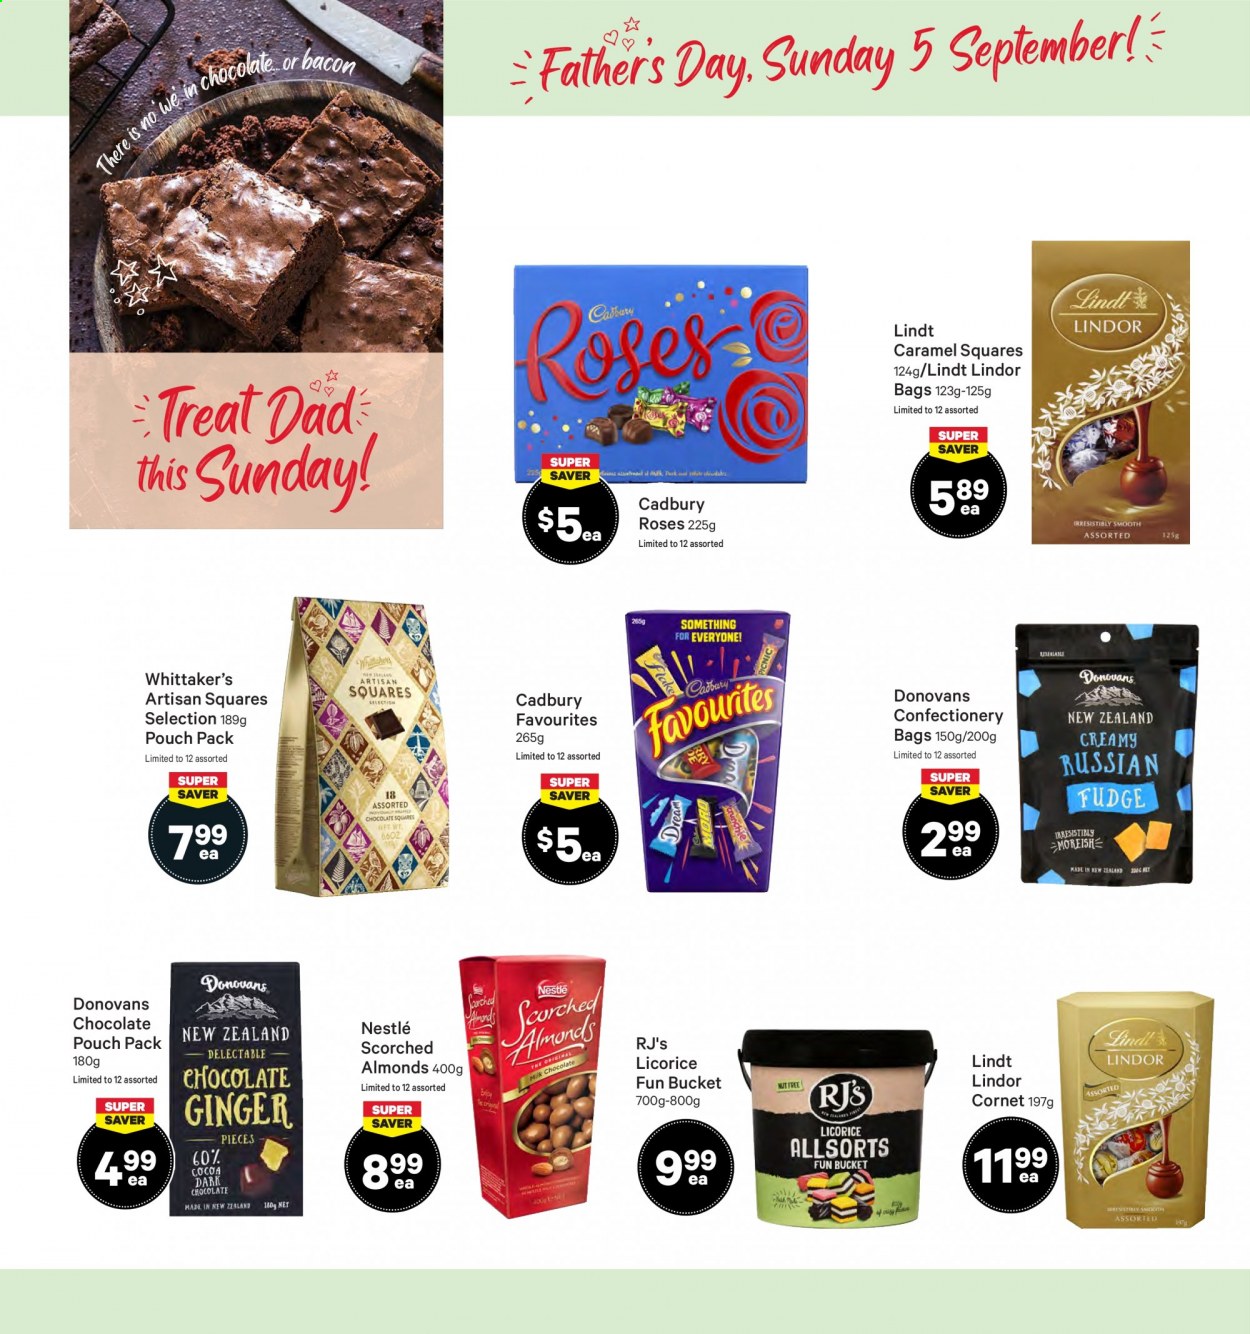 thumbnail - New World mailer - 30.08.2021 - 05.09.2021 - Sales products - ginger, fudge, milk chocolate, Nestlé, chocolate, Lindt, Lindor, dark chocolate, Cadbury, Cadbury Roses, Scorched Almonds, Whittaker's, Artisan Squares Selection, Donovans, caramel. Page 24.